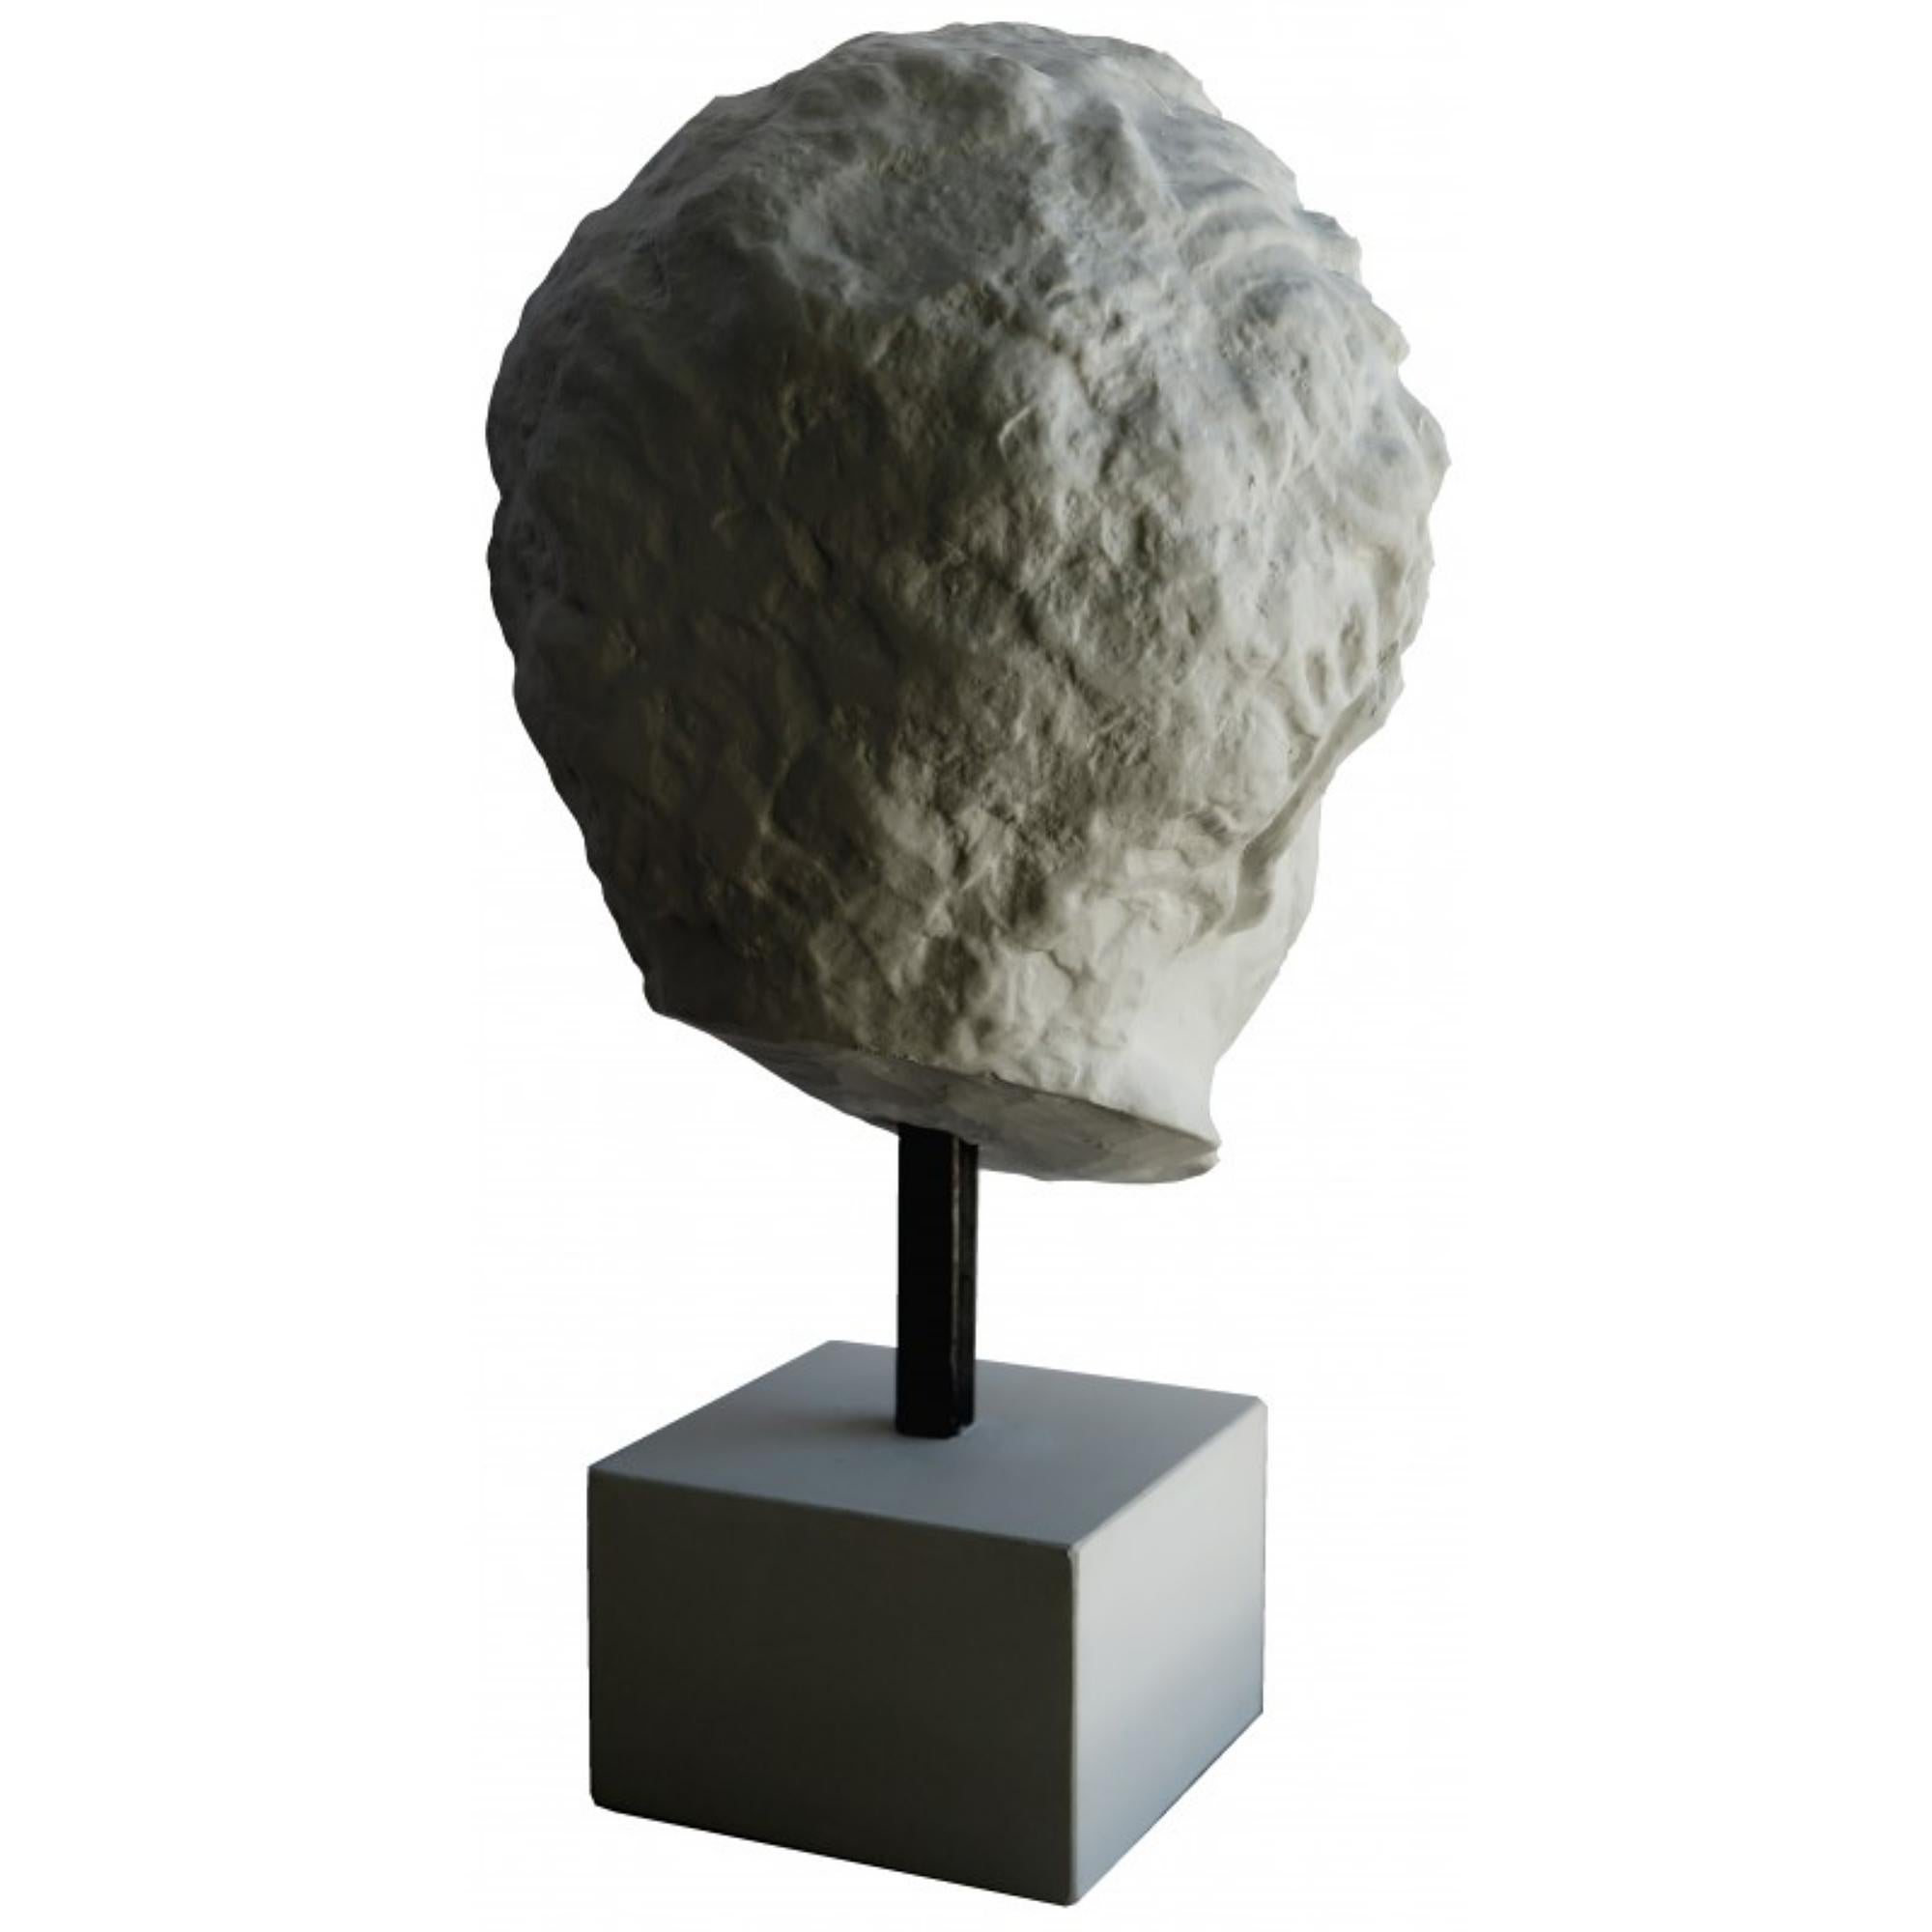 HEAD OF DEMOSTENE in Plaster early 20th Century

Plaster head with base.
Copy of the original from the Archaeological Museum of Athens
HEIGHT 50 cm
WIDTH 20 cm
DEPTH 20 cm
WEIGHT 5 Kg
MATERIAL Gypsum
Base included
good conditions